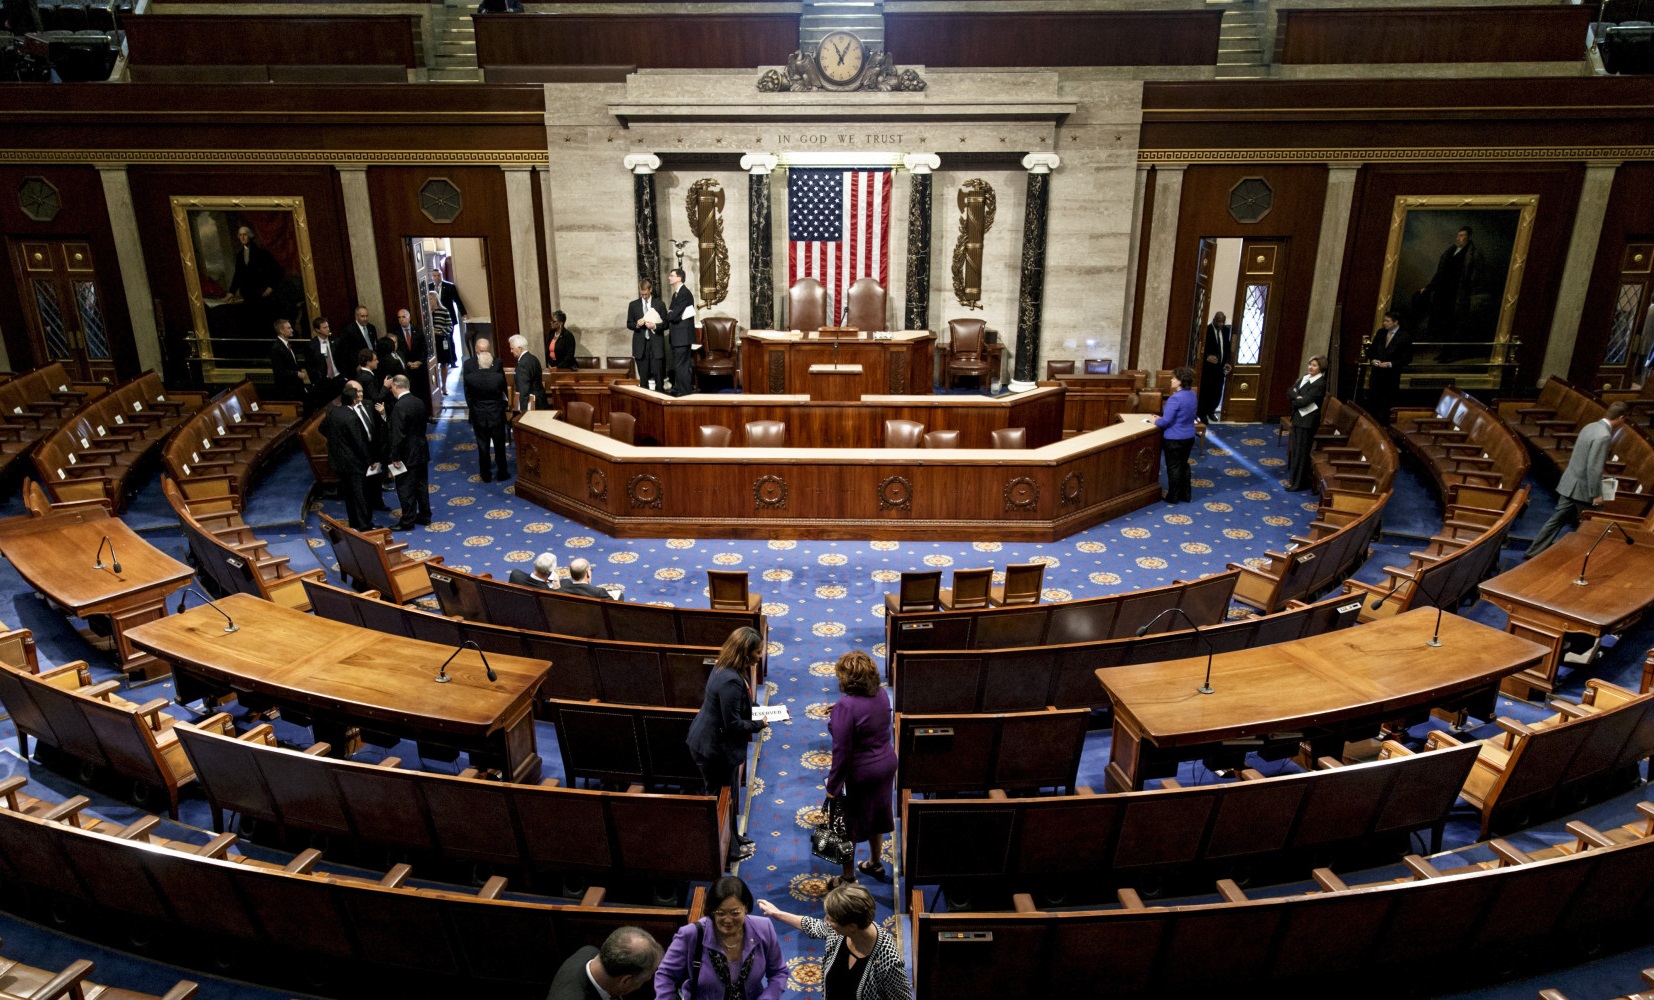 The chamber of the House of Representatives empties following a joint meeting of Congress, at the Capitol in Washington, Thursday, Sept. 18, 2014, with visiting Ukranian President Petro Poroshenko. The House and Senate are wrapping up business and heading to their home states for the weeks leading up to the midterm elections. (AP Photo/J. Scott Applewhite)